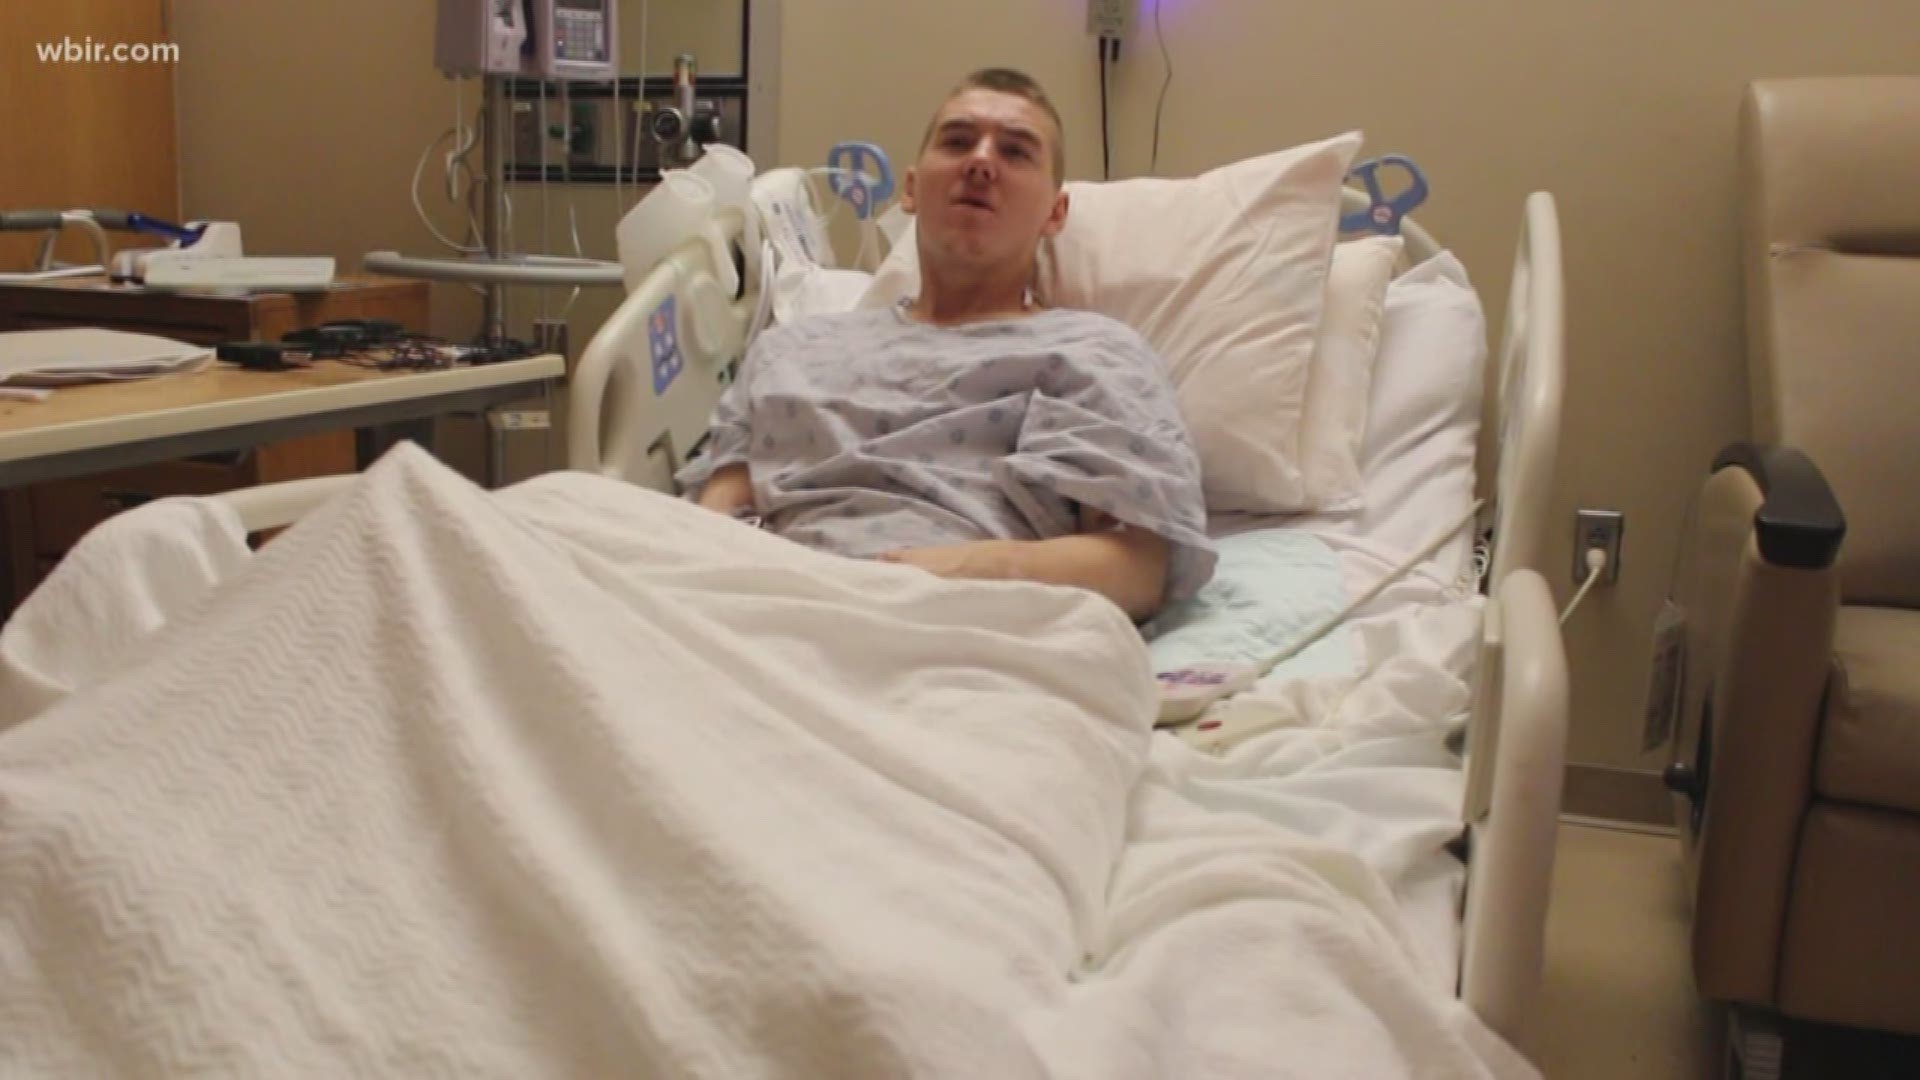 20-year-old Austin Miller says he thought he was going to die after he crashed an ATV in the mountains.